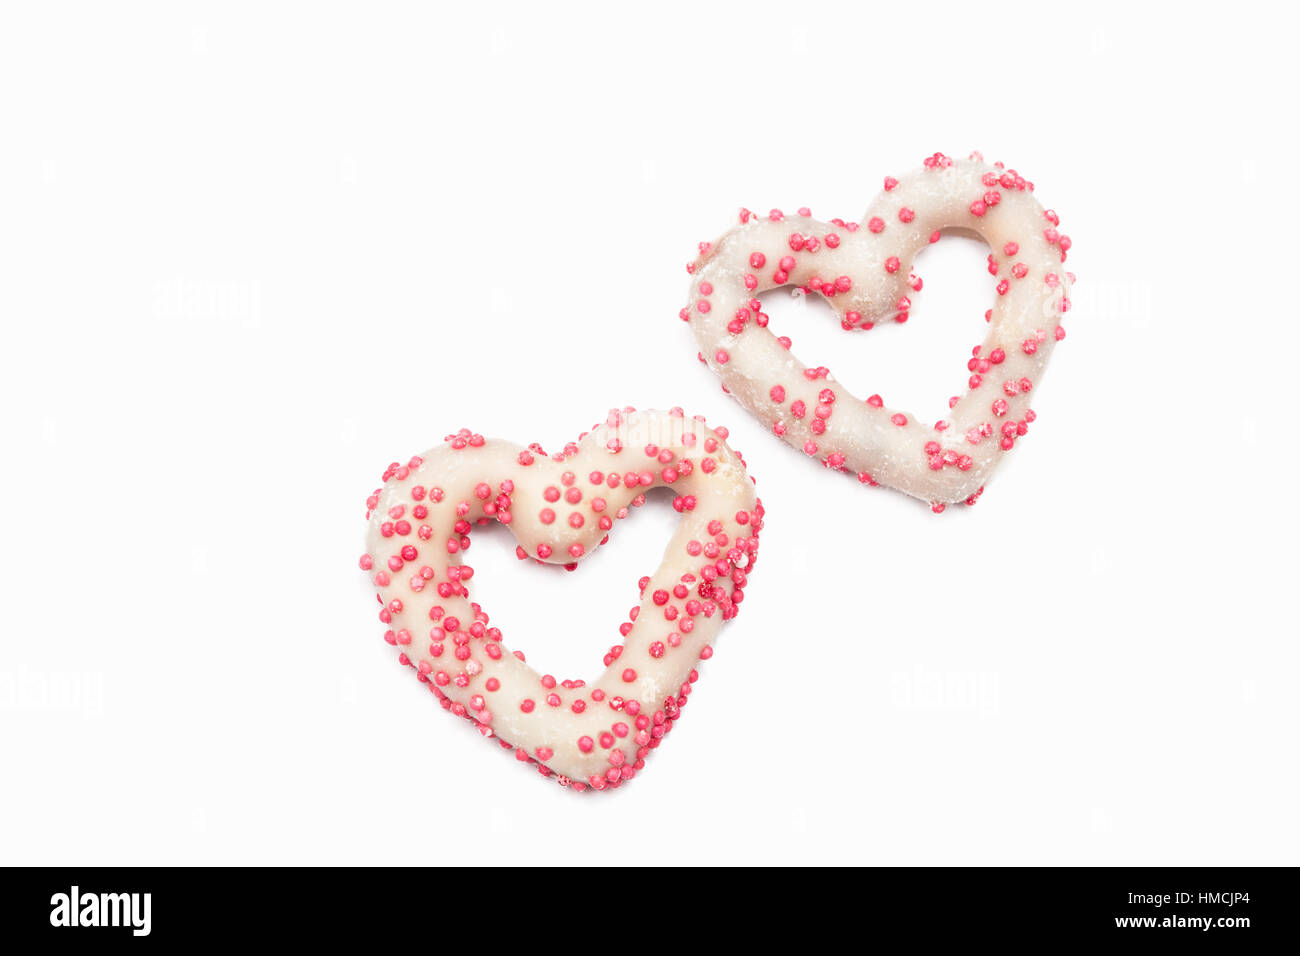 Two white chocolate covered pretzels Stock Photo